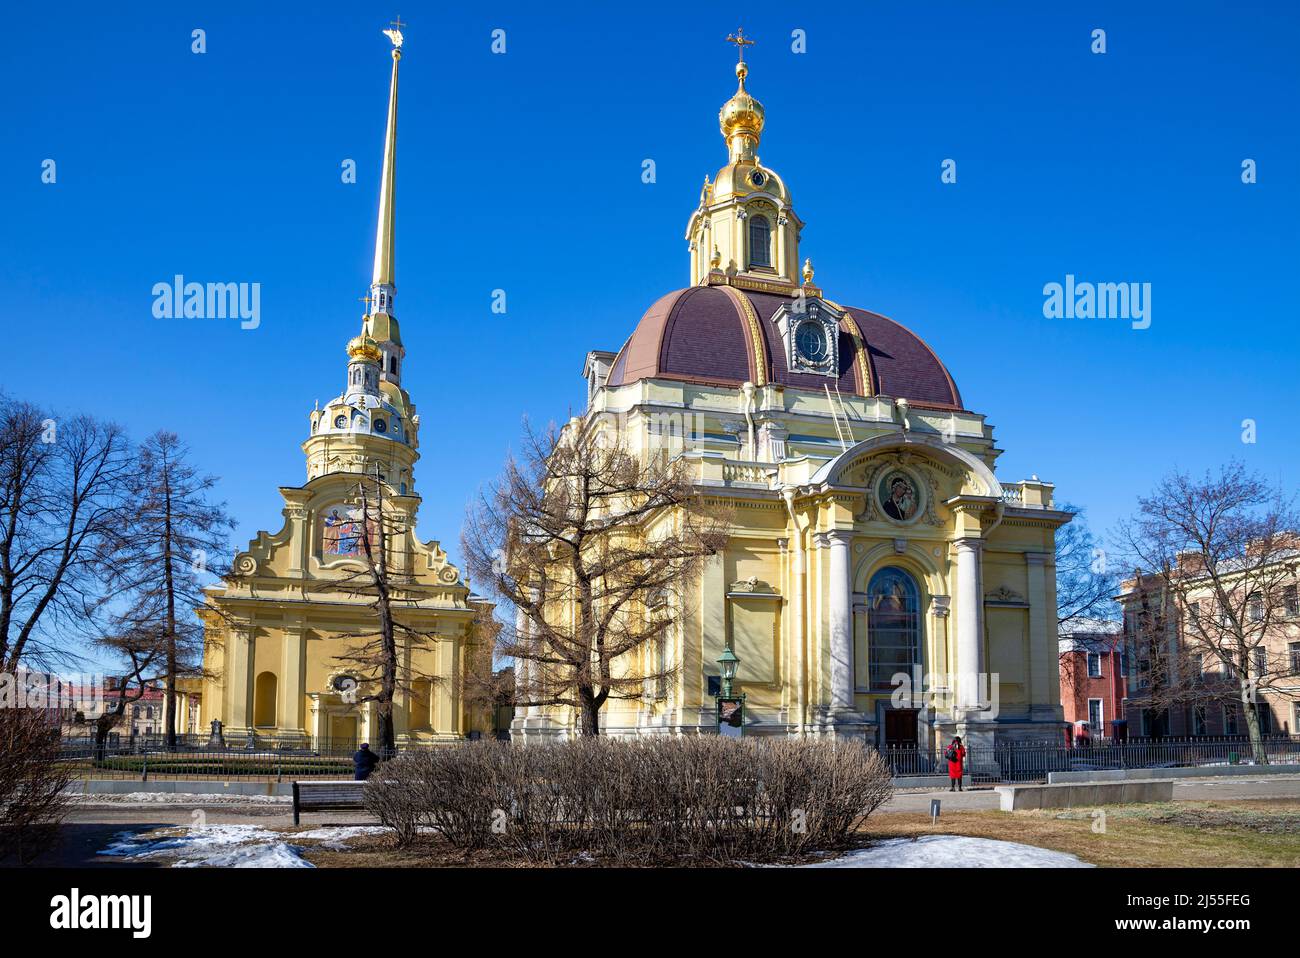 ST. PETERSBURG, RUSSIA - APRIL 03, 2022: Spring day on the territory of the Peter and Paul Fortress. Saint-Petersburg Stock Photo